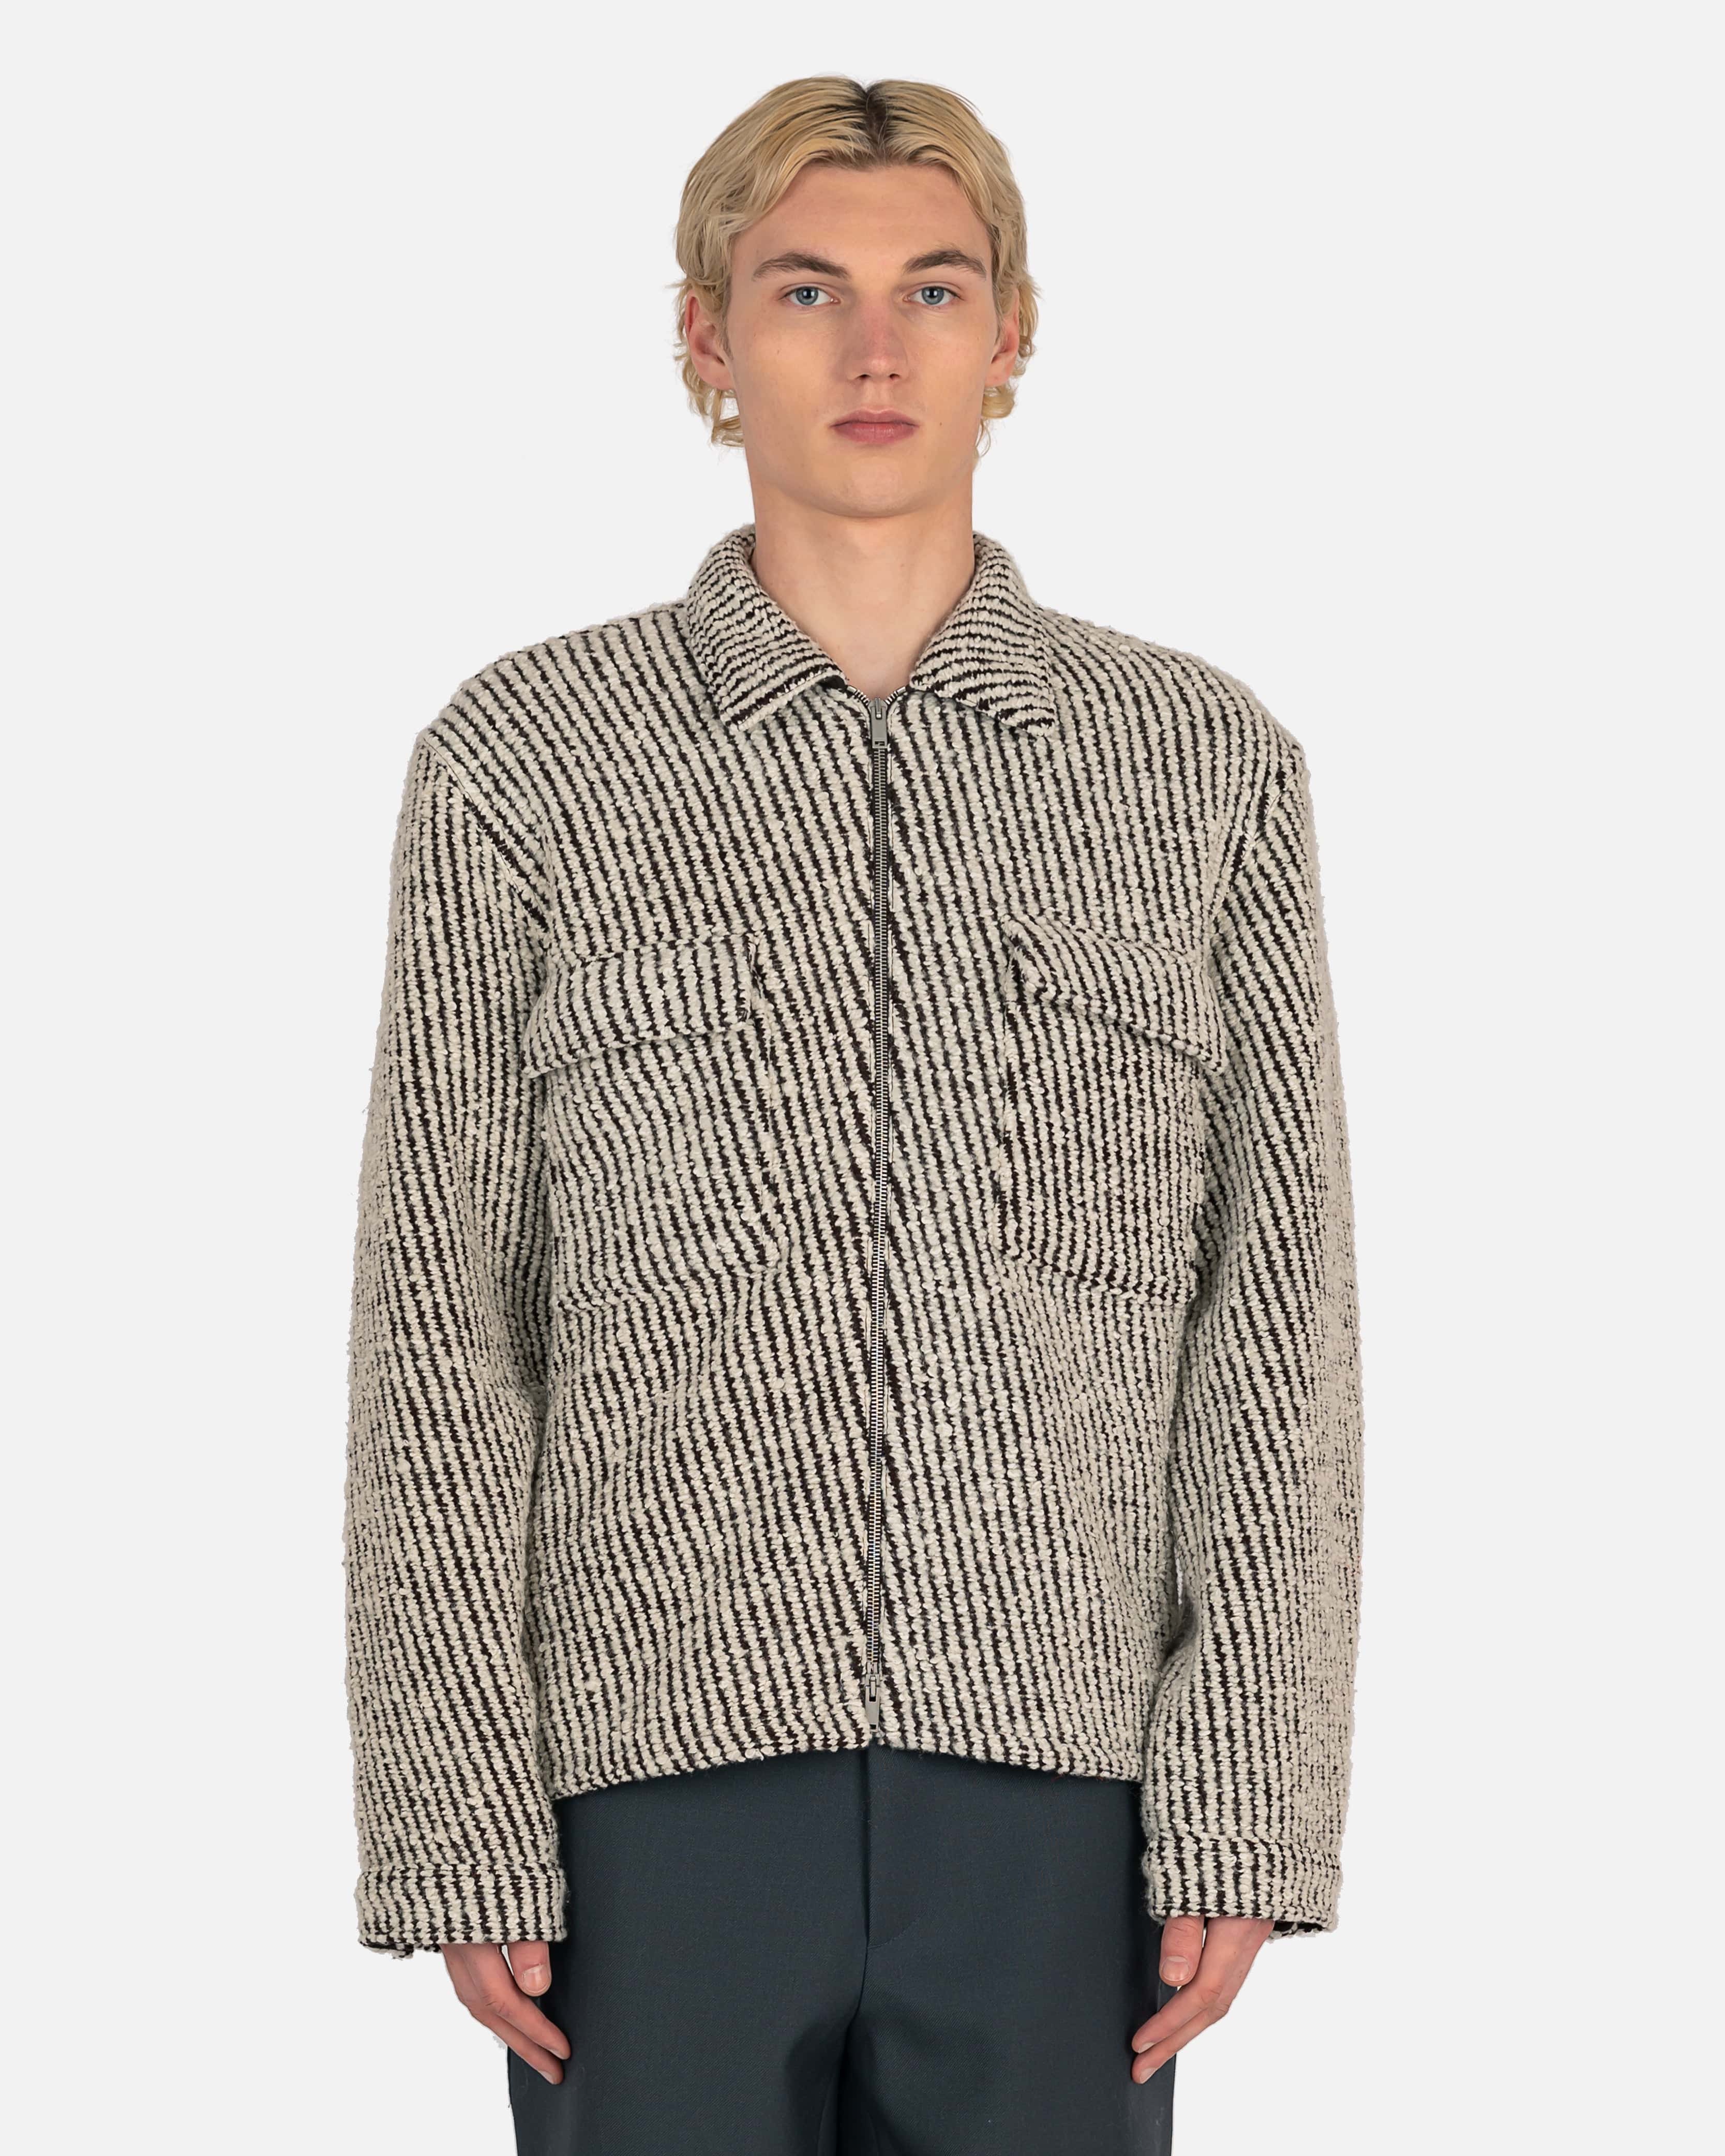 Jacquard Knit Shirt in Open White – SVRN